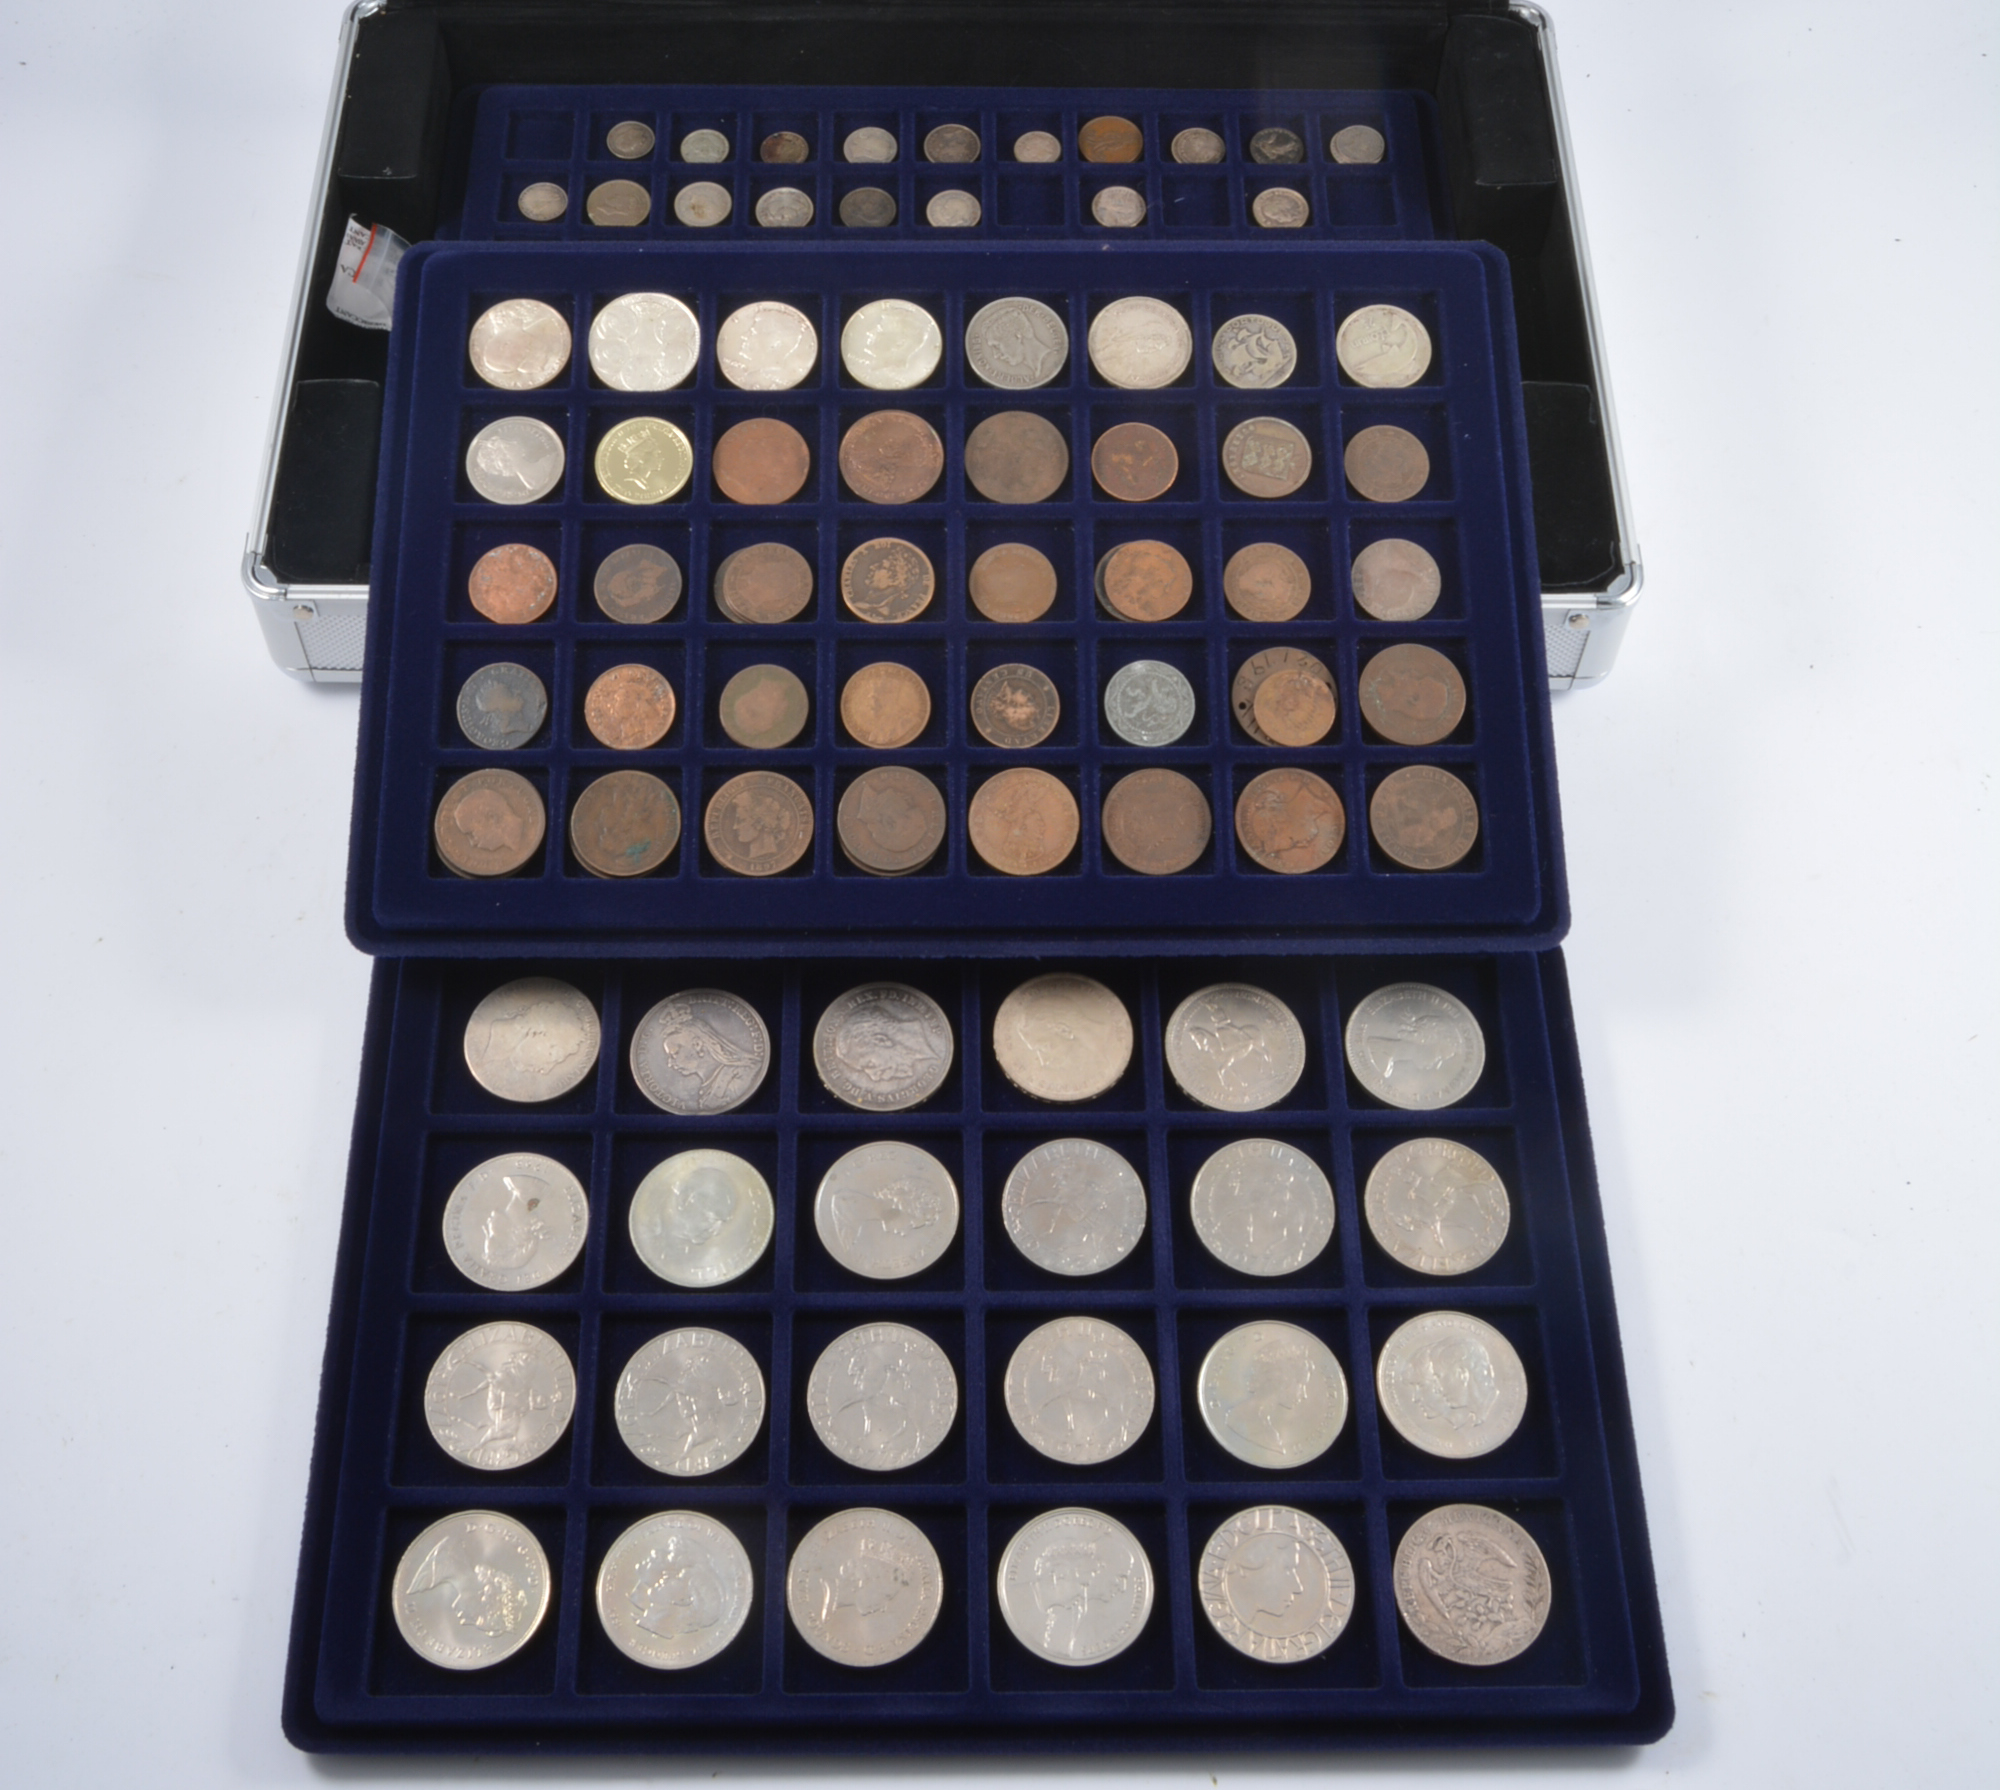 A collection of coins in trays, UK and USA, George III through to present day.